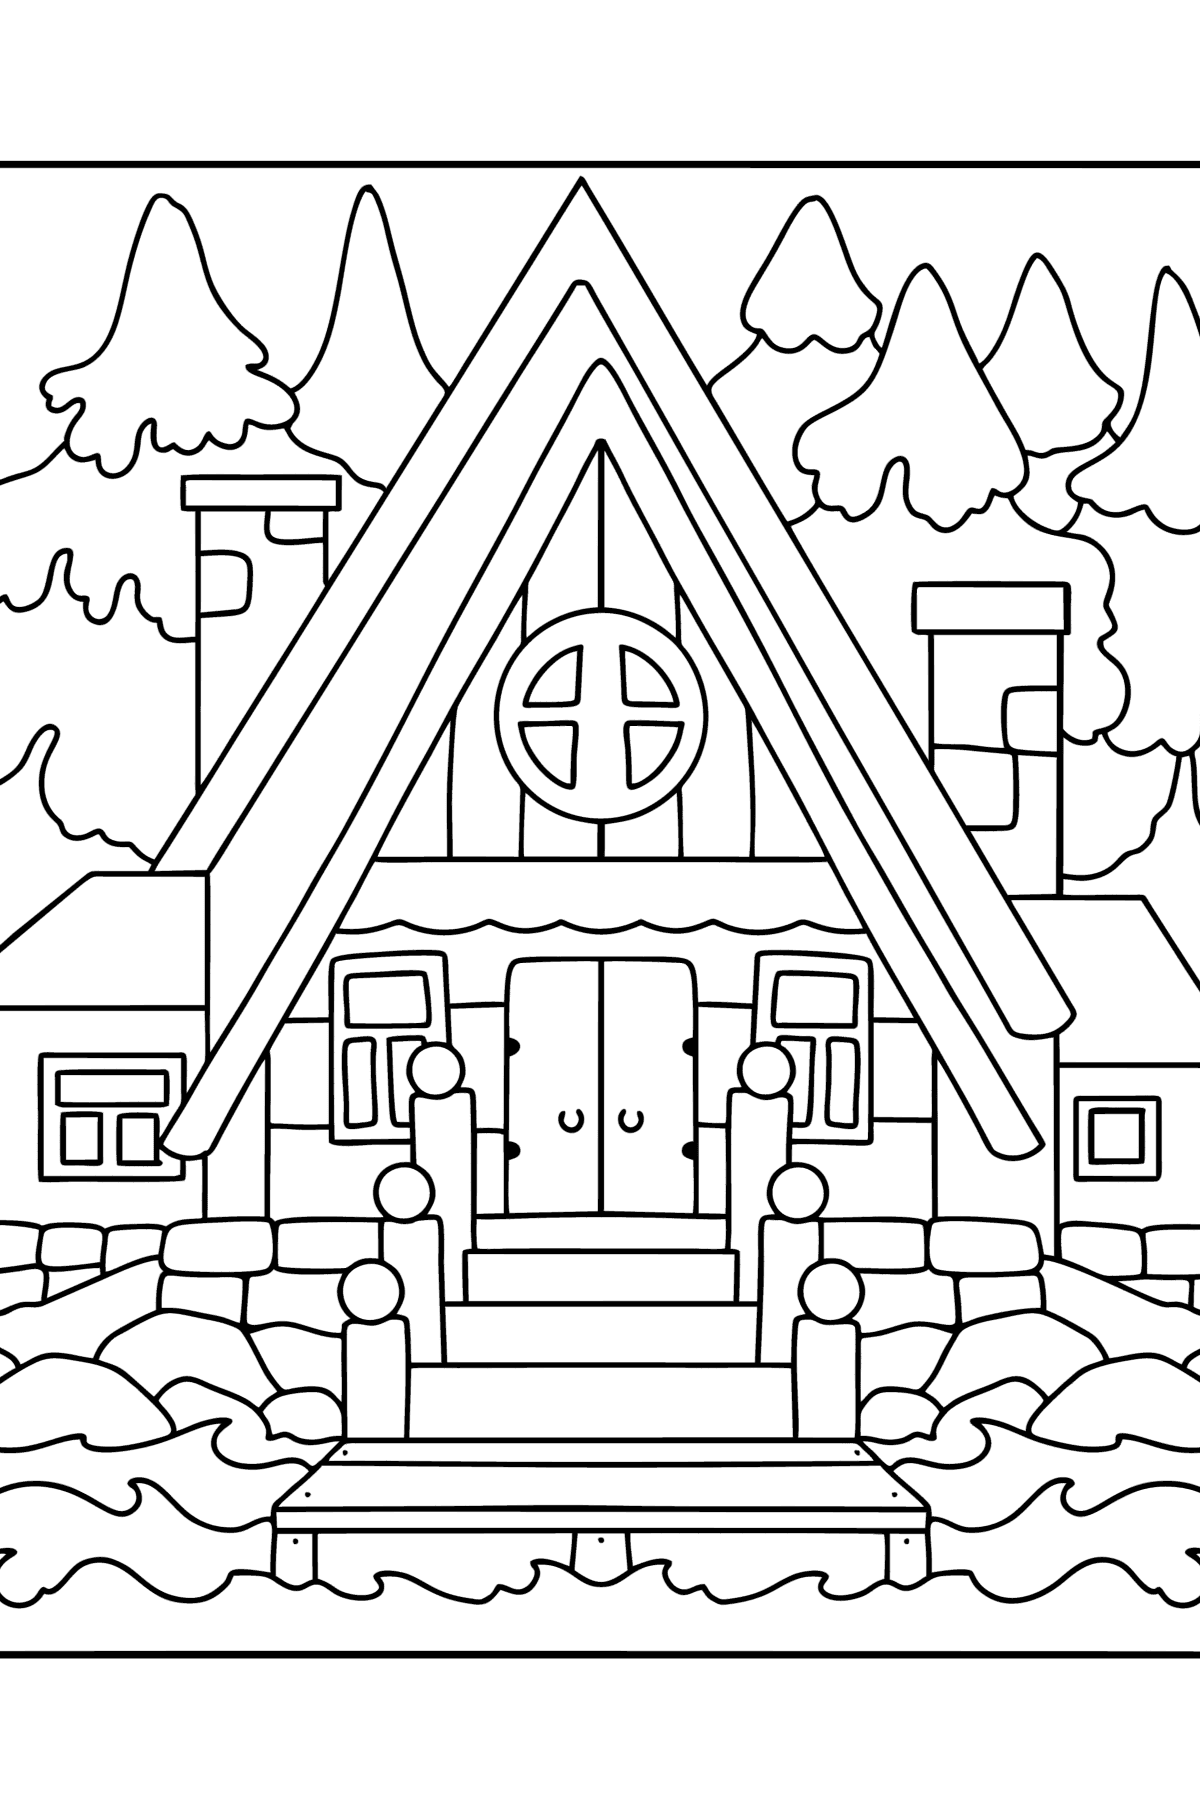 Country House Near The River coloring page - Coloring Pages for Kids